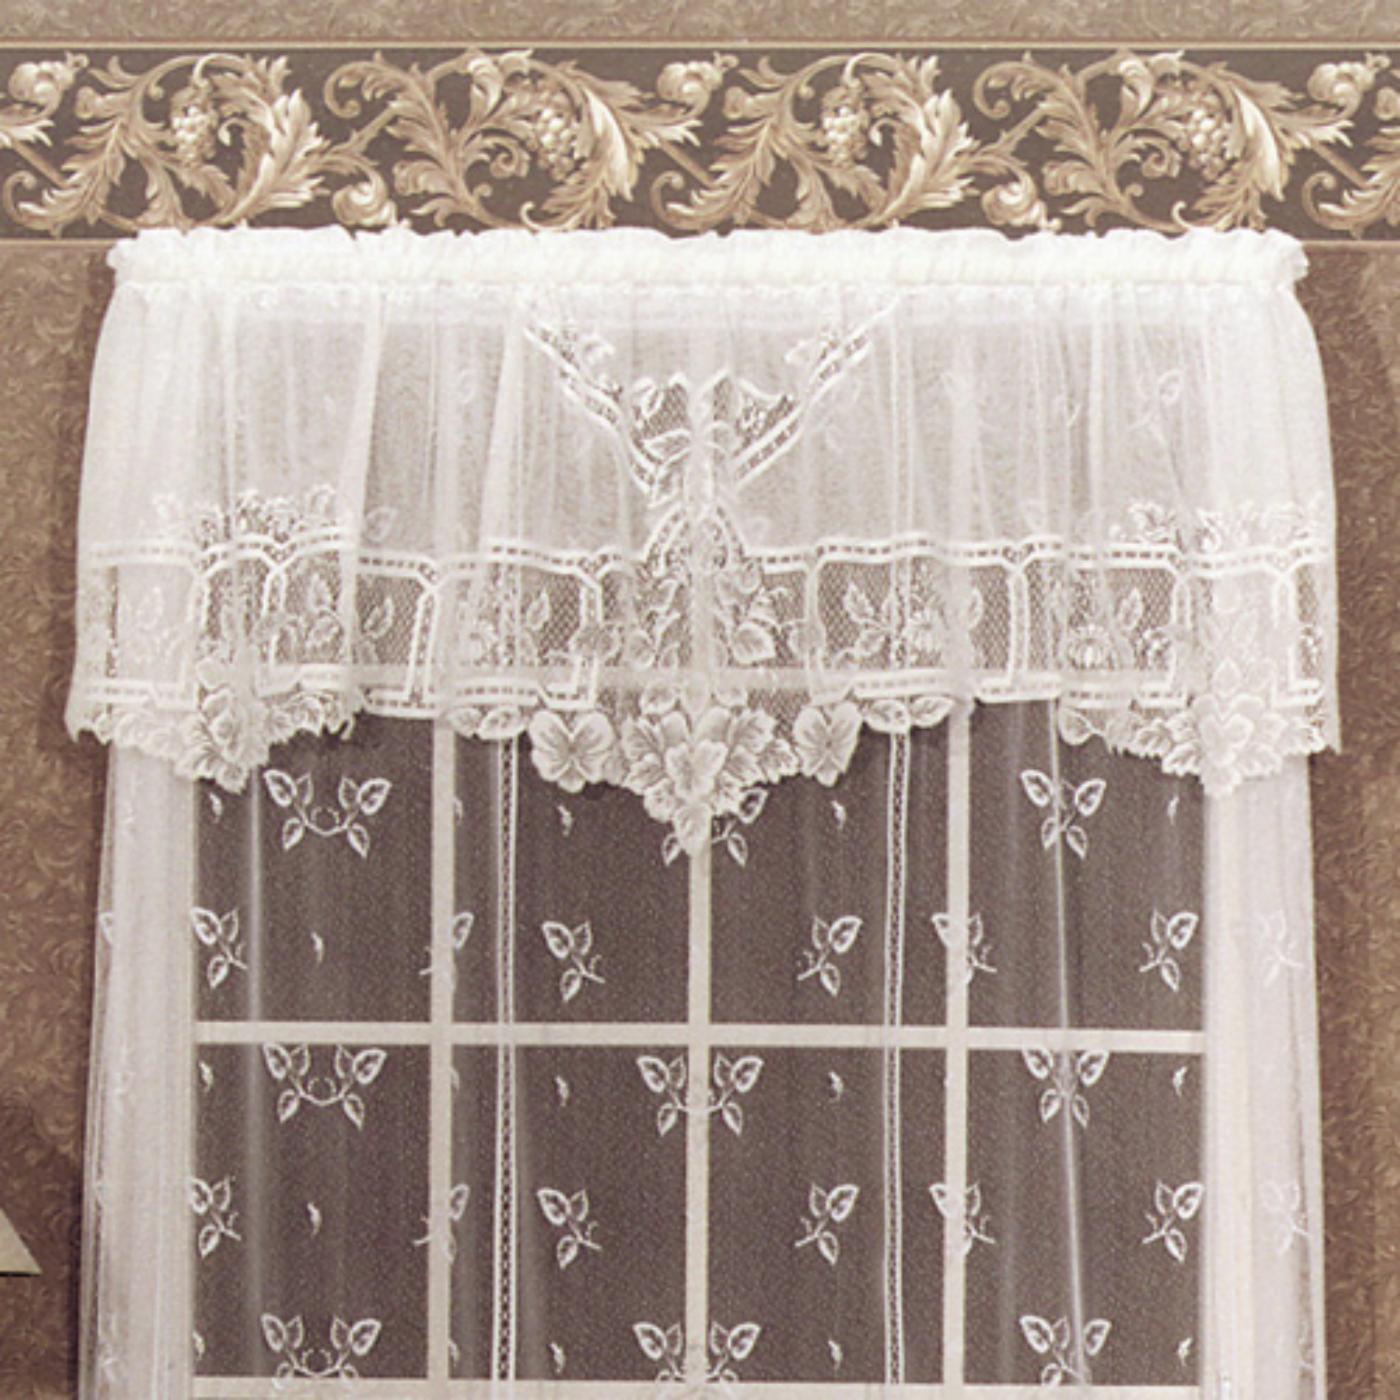 Heritage Lace Curtains | Heirloom Sheer Valance